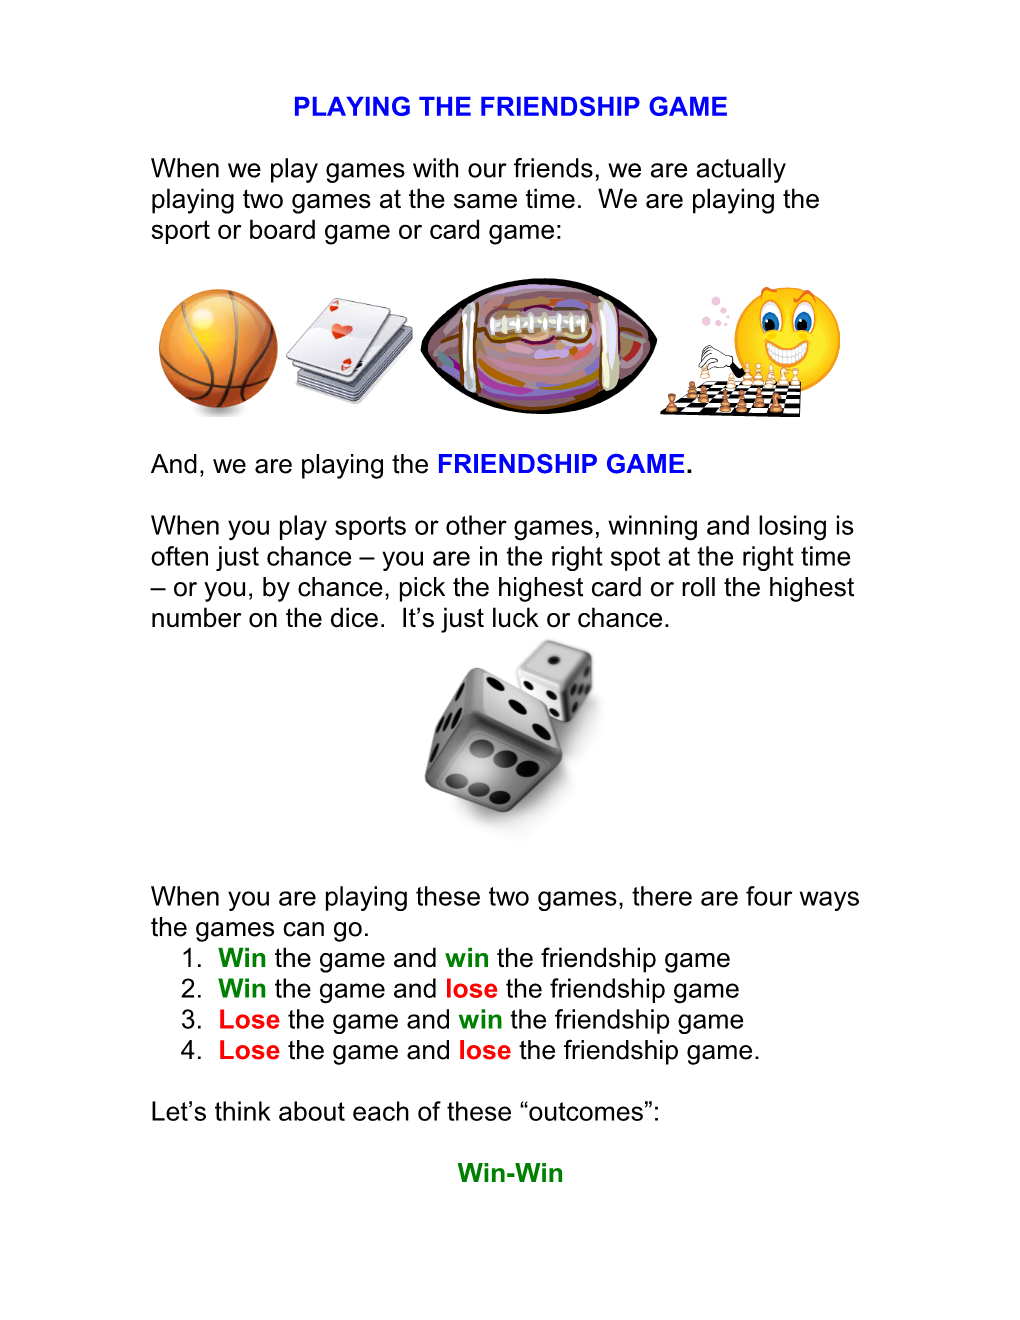 Playing the Friendship Game